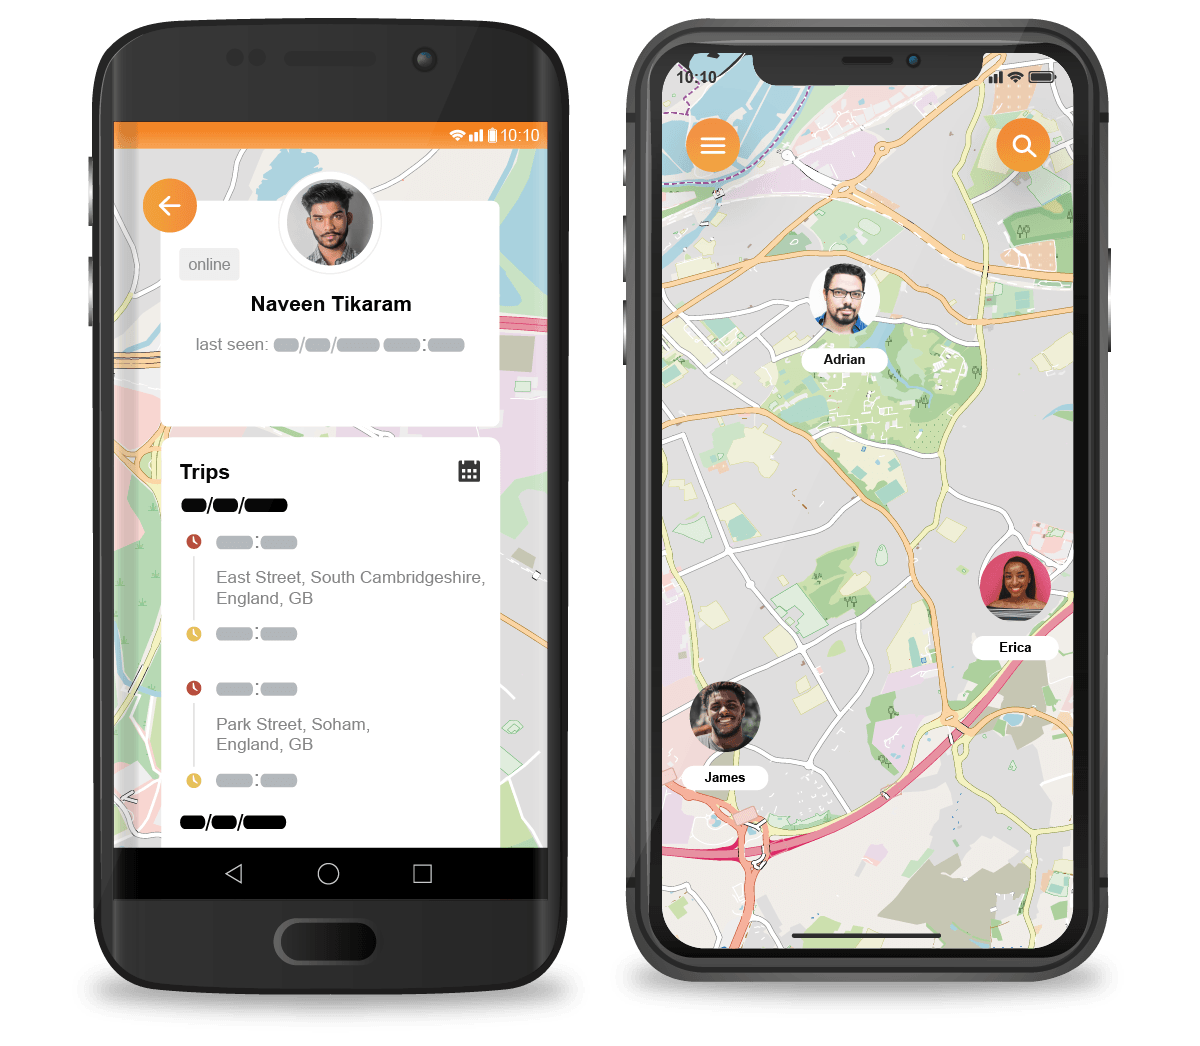 Vehicle tracking from a smartphone